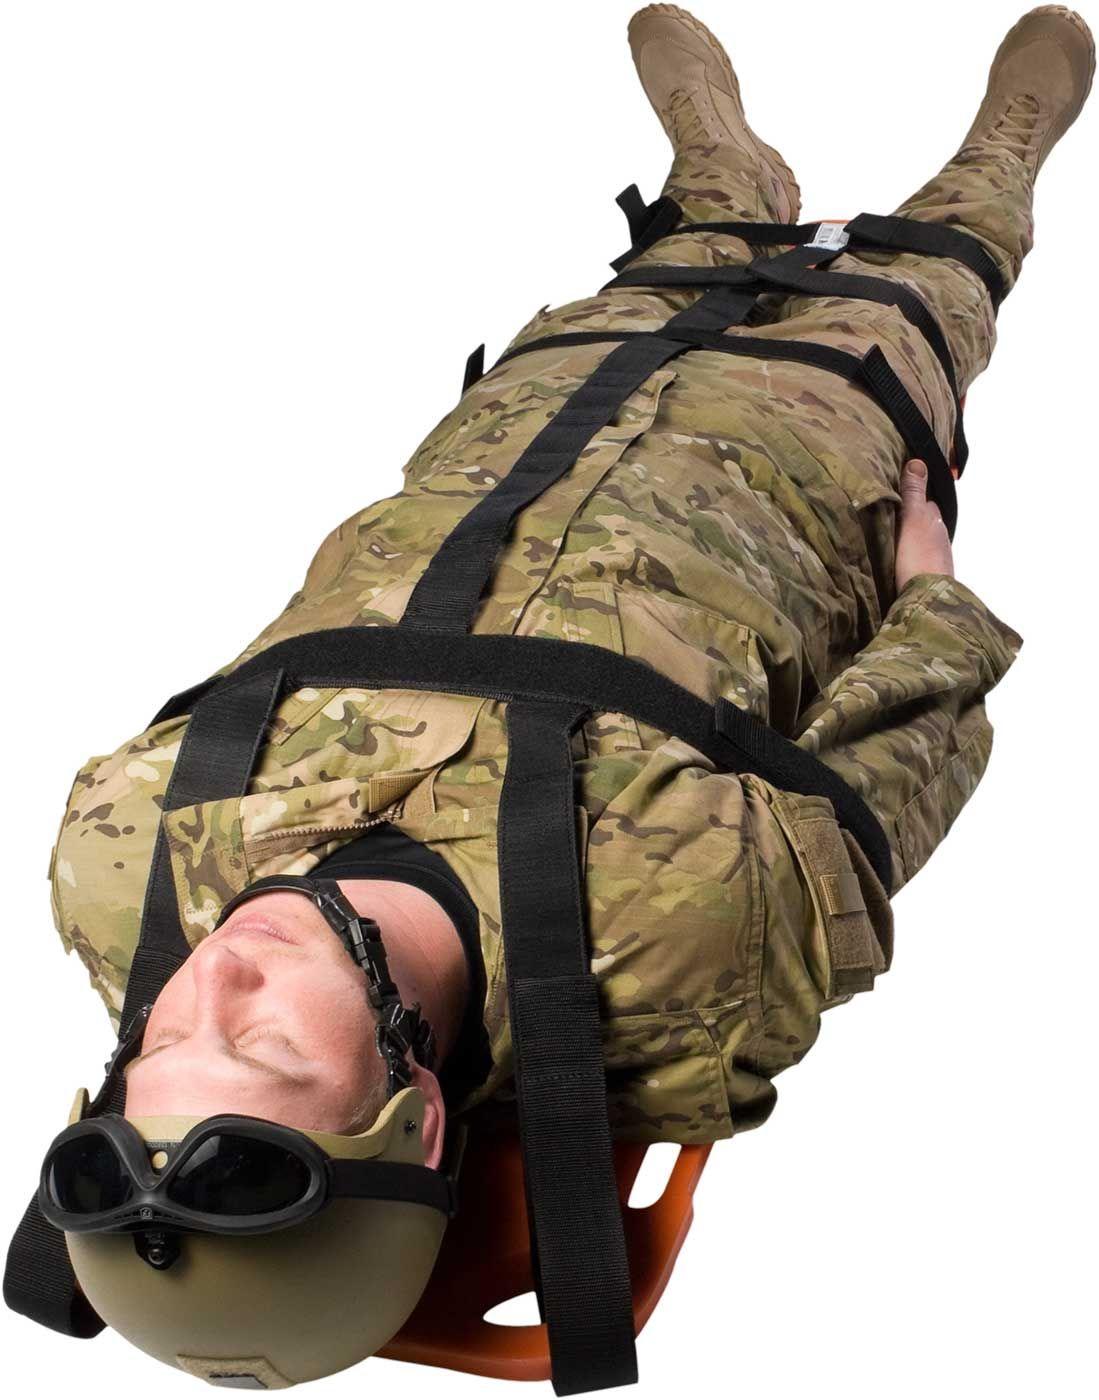 NAR CASUALTY IMMOBILIZATION SYSTEM STRAPS ONLY - Techline Trauma